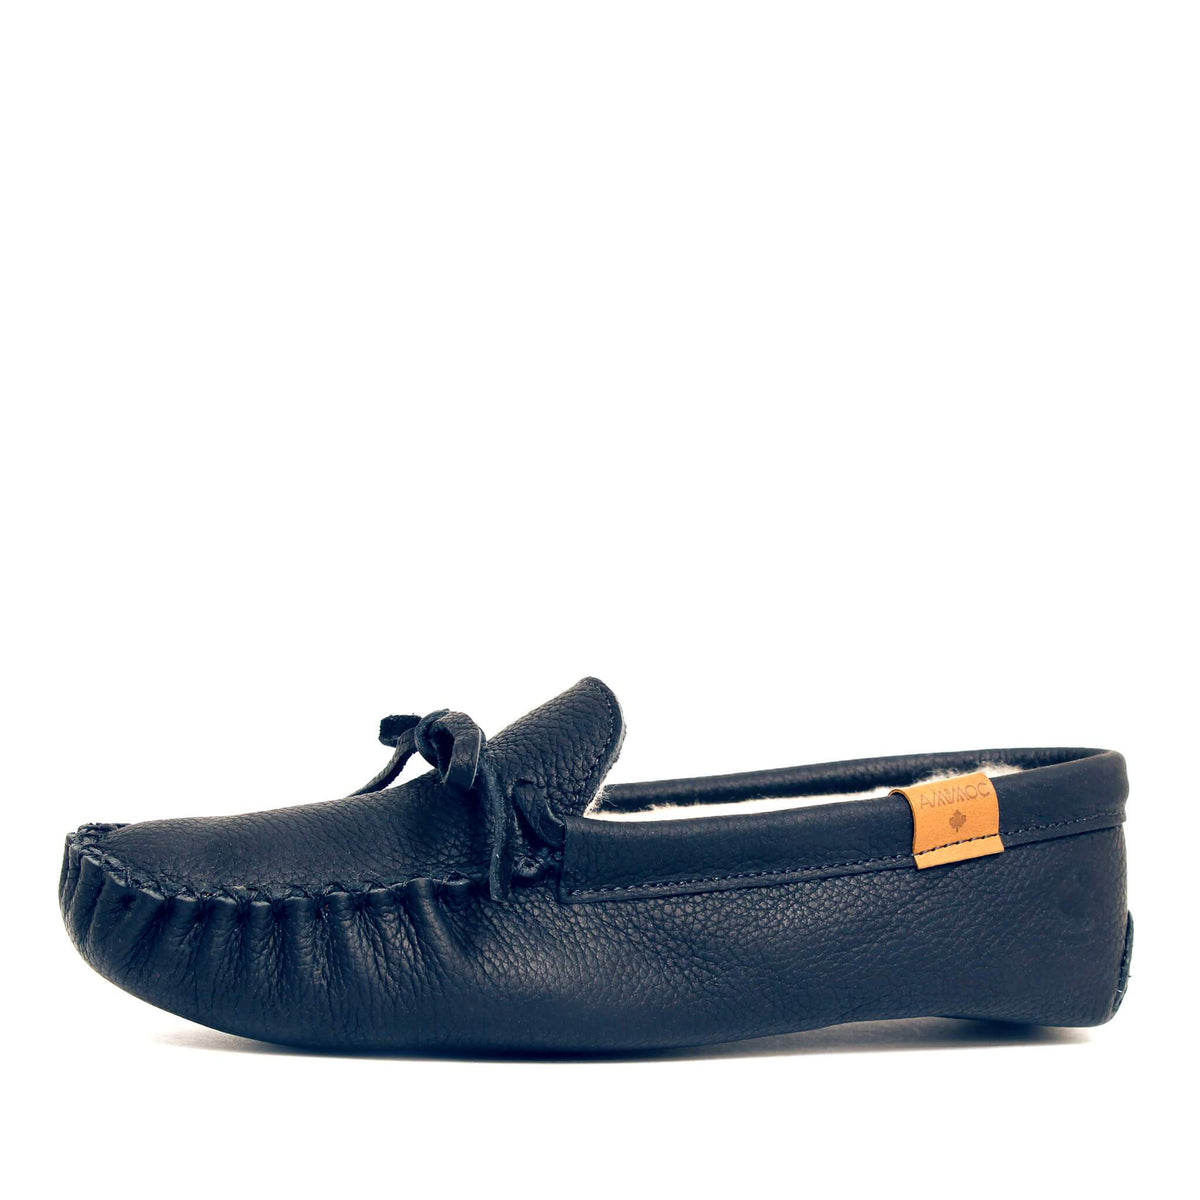 AMIMOC- Lenno grizzly navy moccasin for men